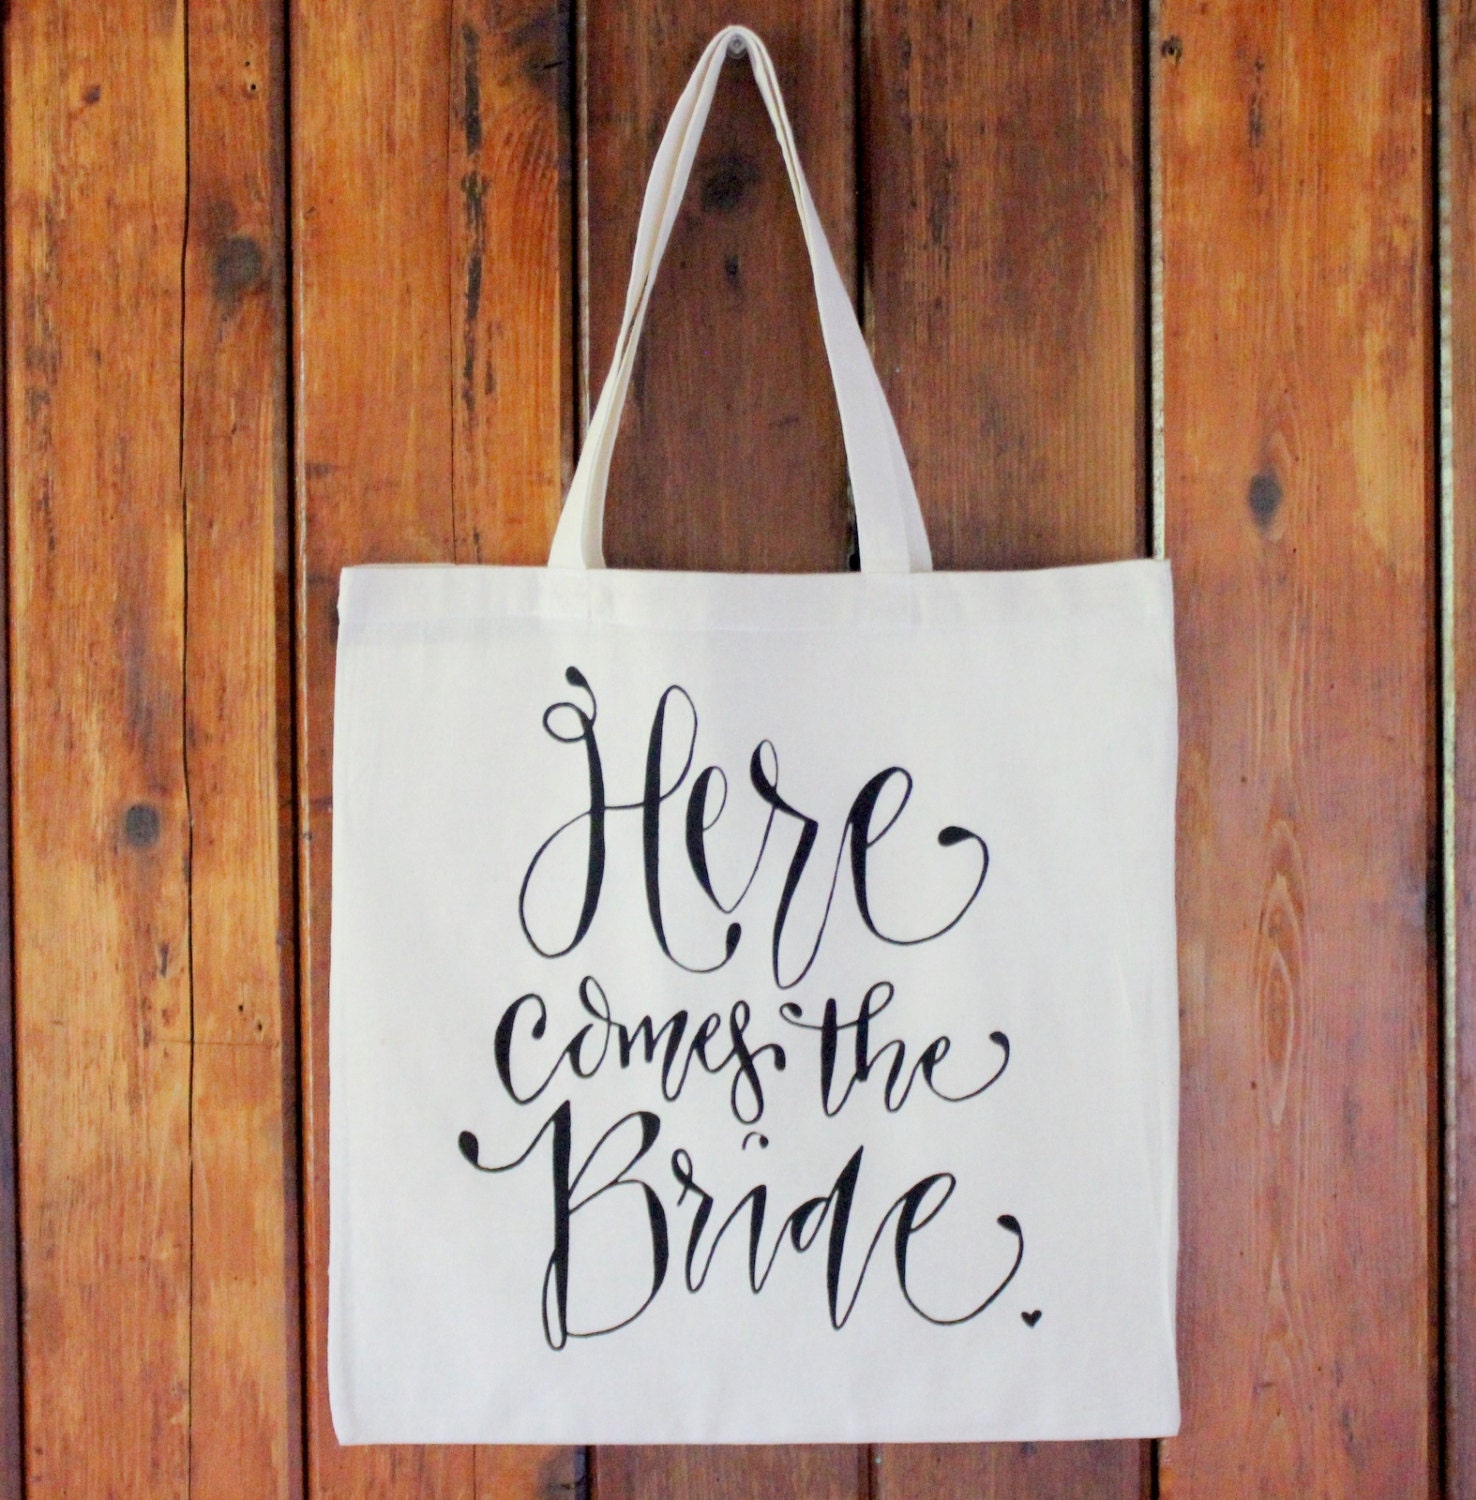 Here Comes The Bride Bridal Shower Gift Bag by DreamState on Etsy